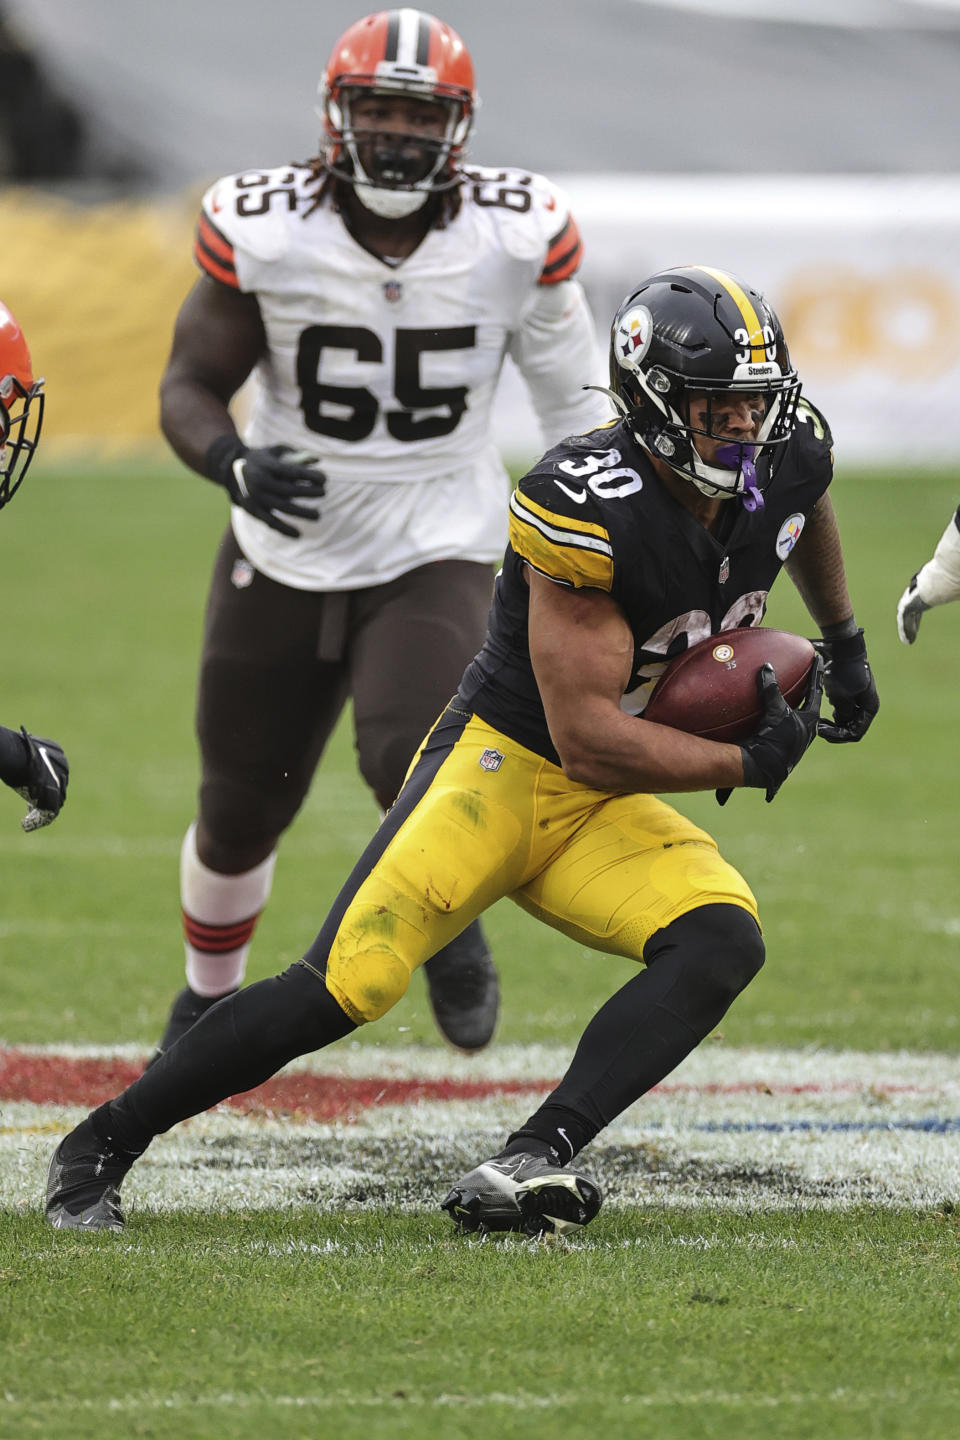 Pittsburgh Steelers running back James Conner (30) carries the ball an NFL game against the Cleveland Browns, Sunday, Oct. 18, 2020, in Pittsburgh. The Steelers defeated the Browns 38-7. (Margaret Bowles via AP)